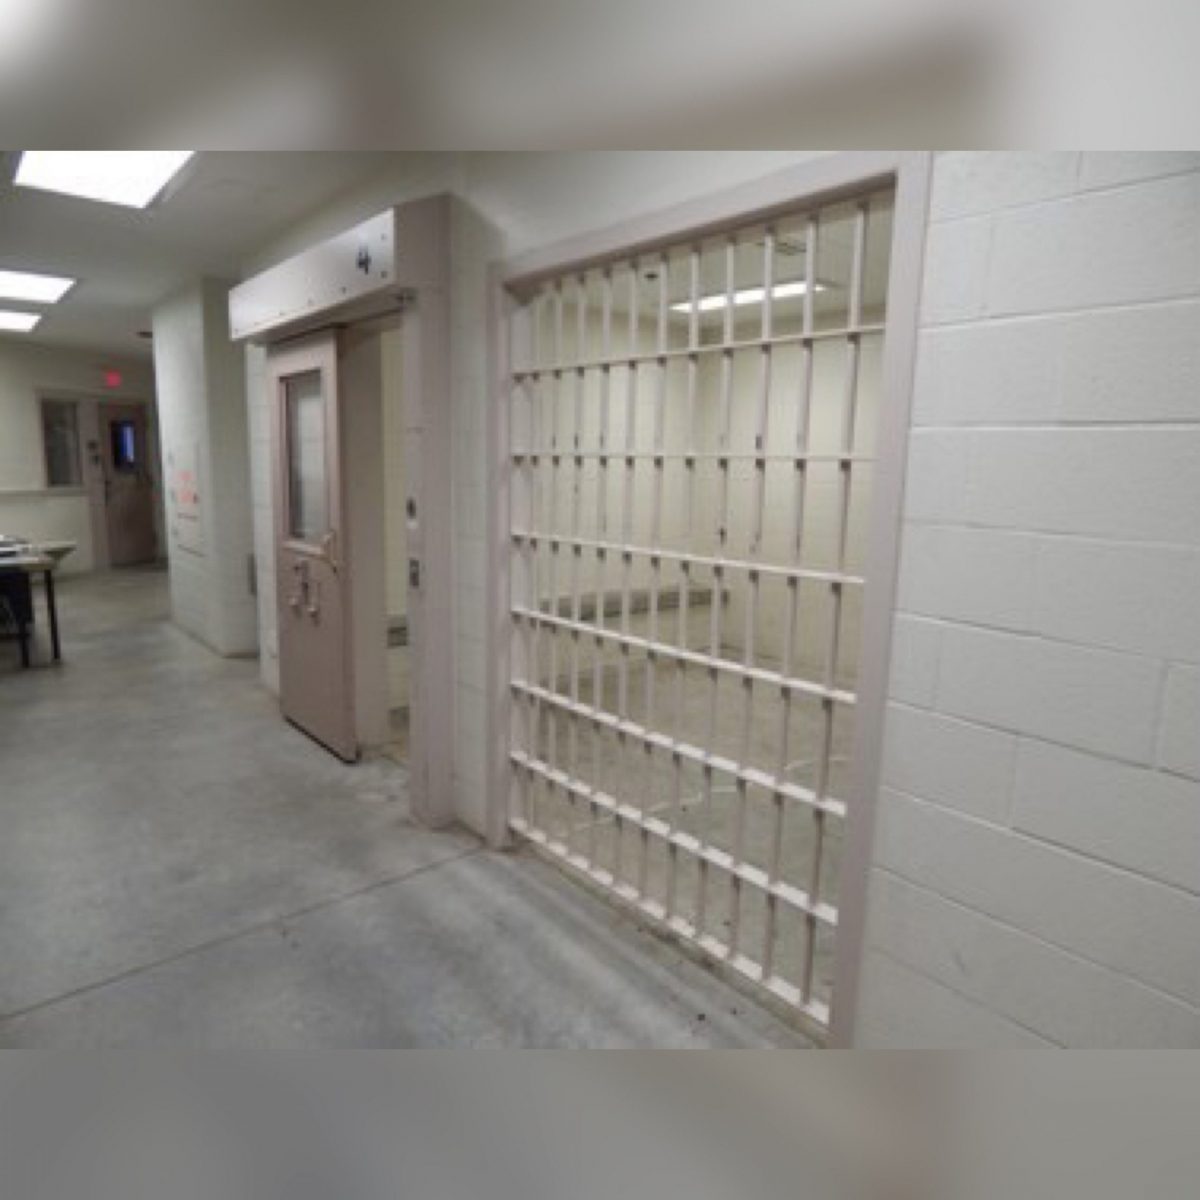 Search ontario jail inmate Ontario County,